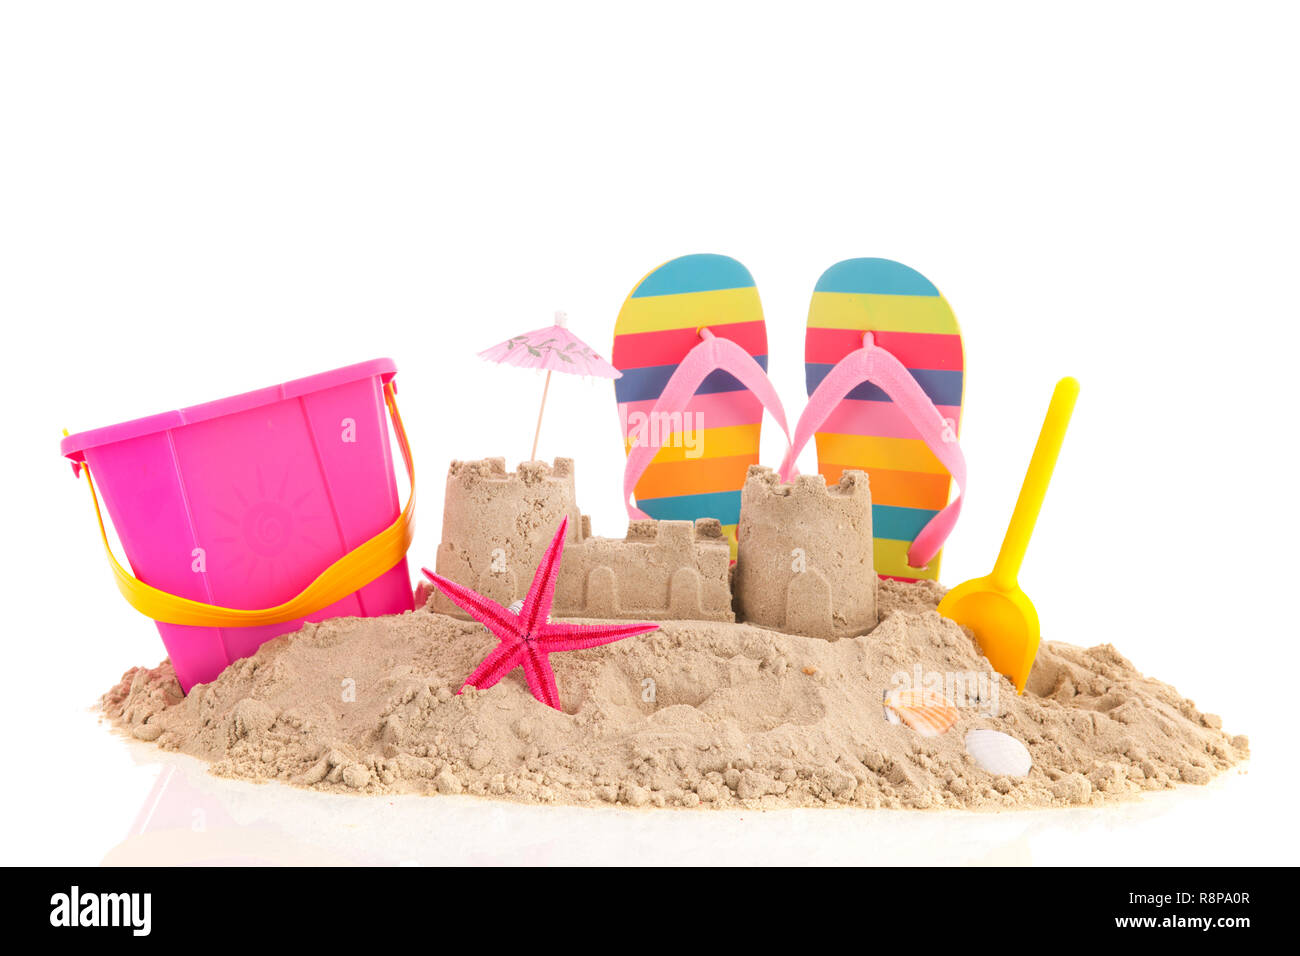 Sand castle andd toys at the beach isolated over white background Stock Photo